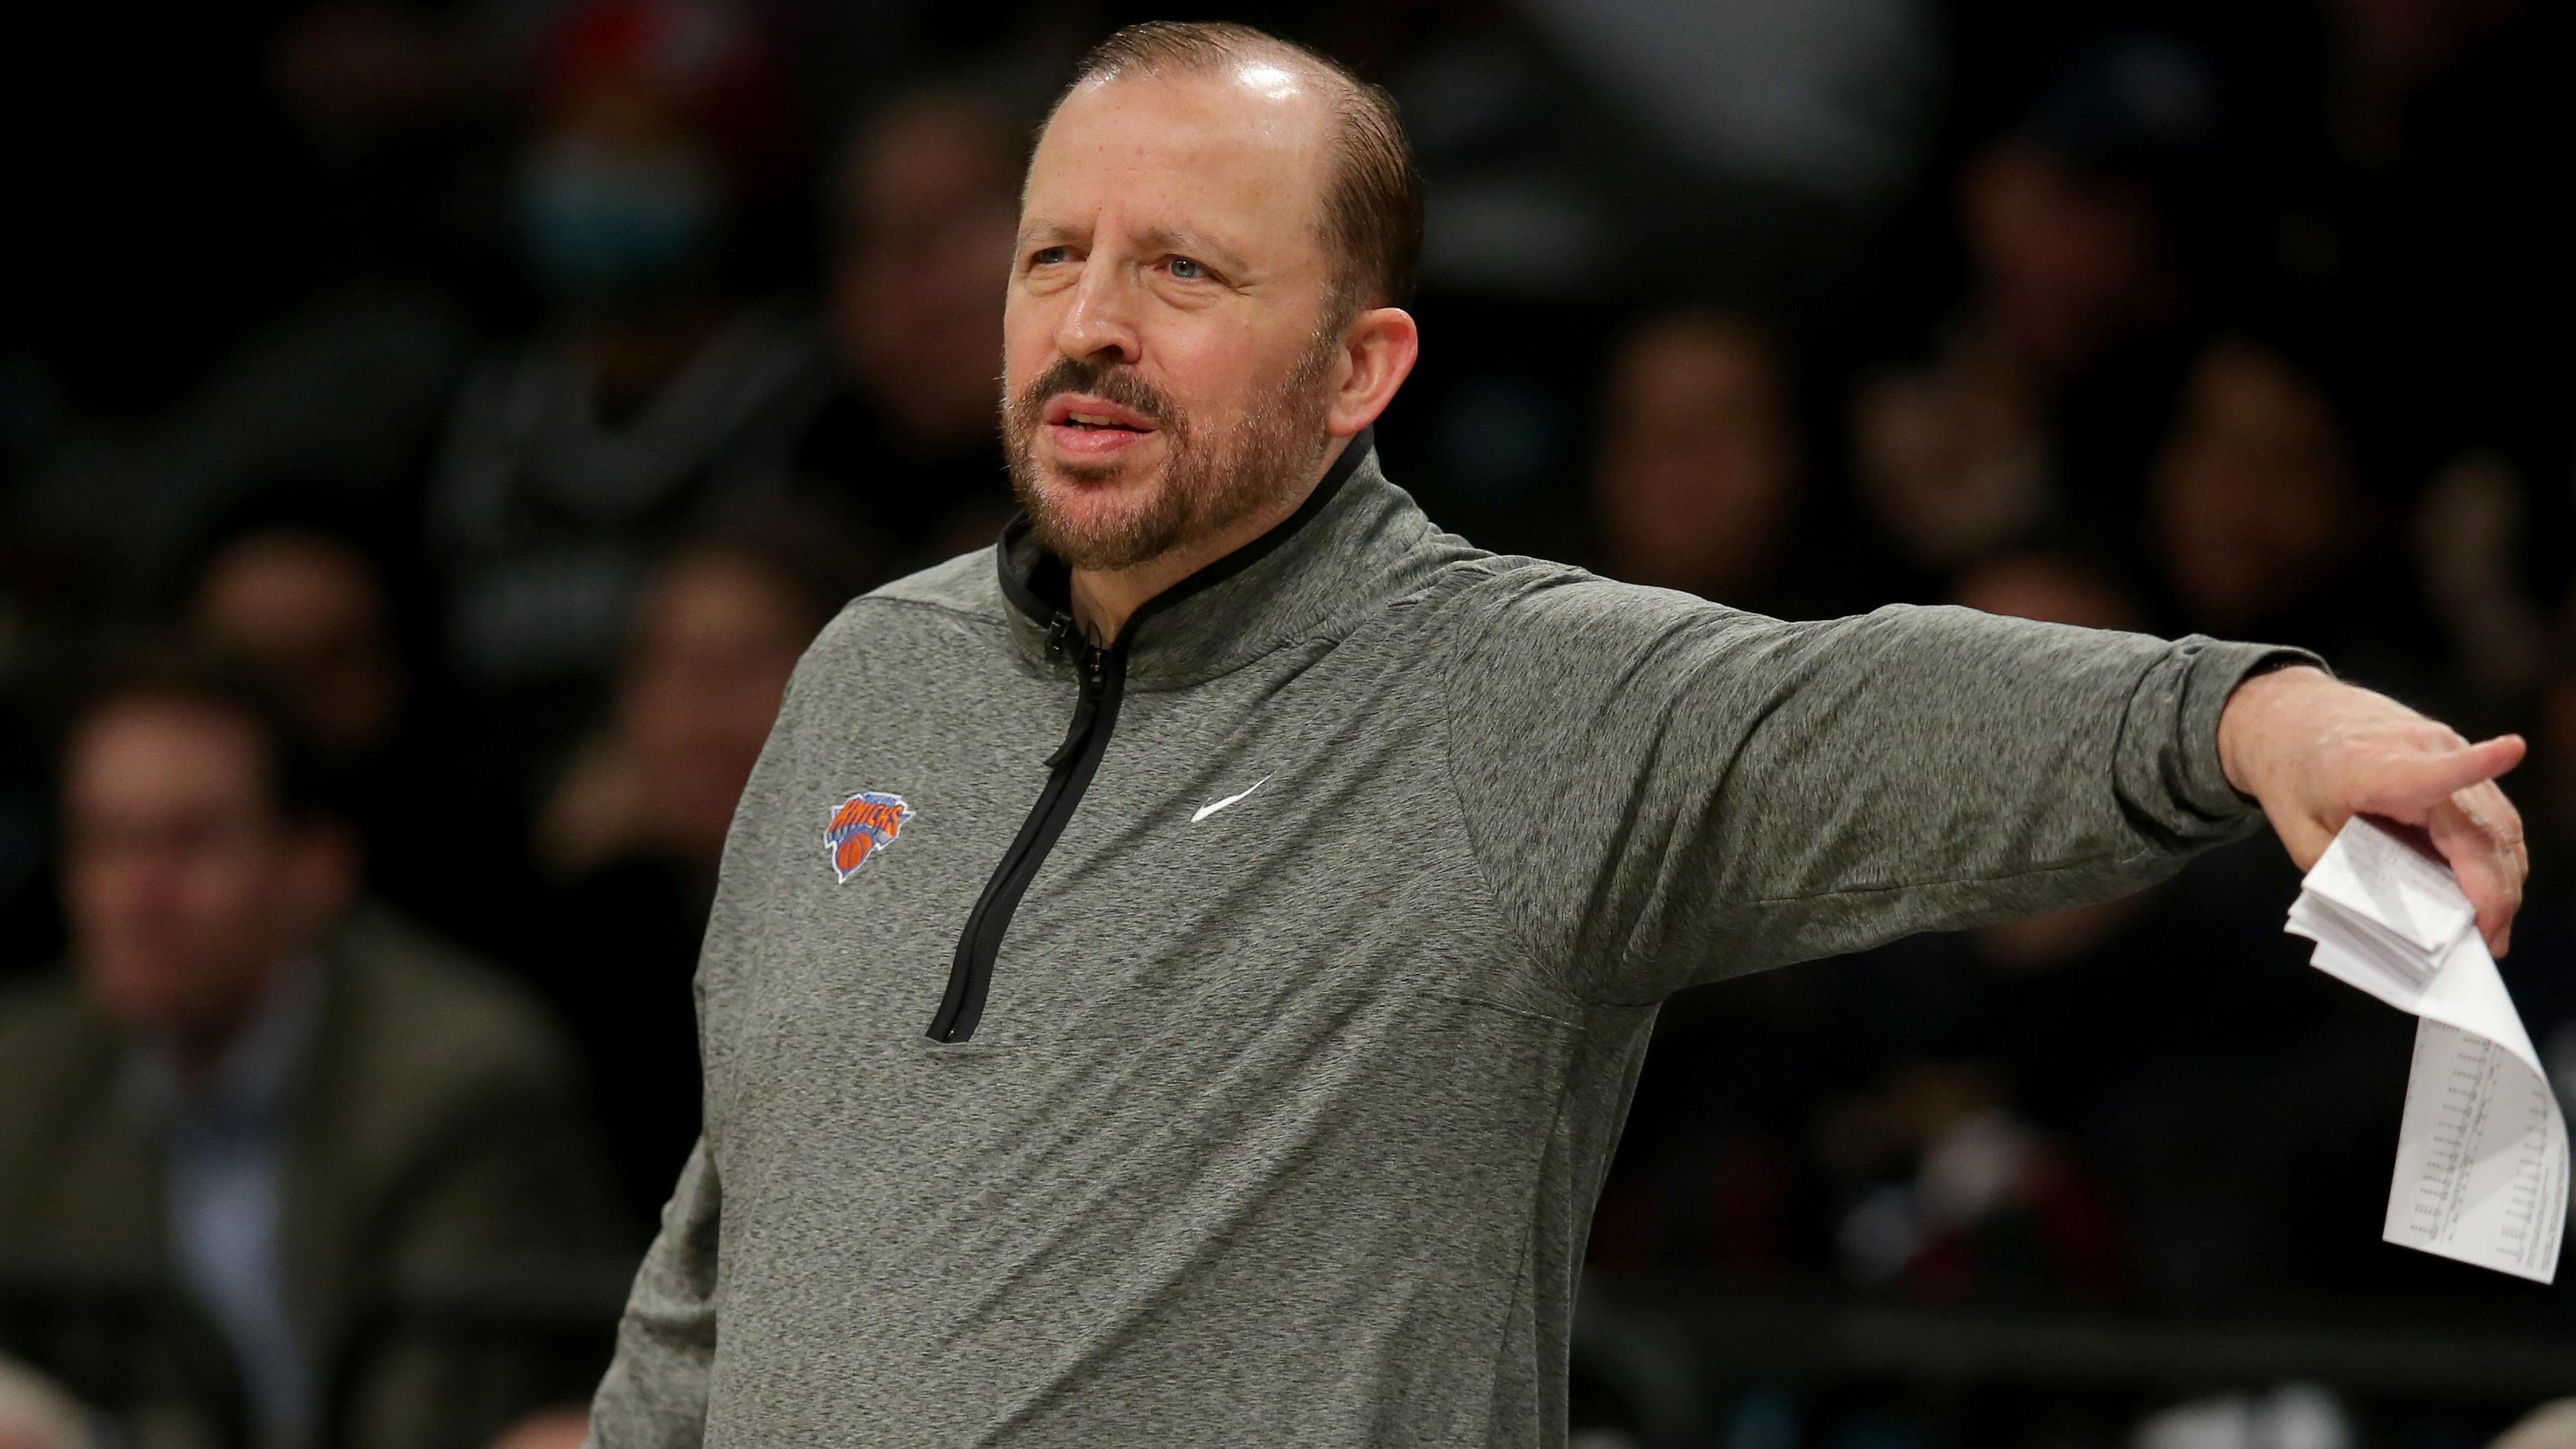 Nov 9, 2022; Brooklyn, New York, USA; New York Knicks head caoch Tom Thibodeau coaches against the Brooklyn Nets during the first quarter at Barclays Center. Mandatory Credit: Brad Penner-USA TODAY Sports / © Brad Penner-USA TODAY Sports